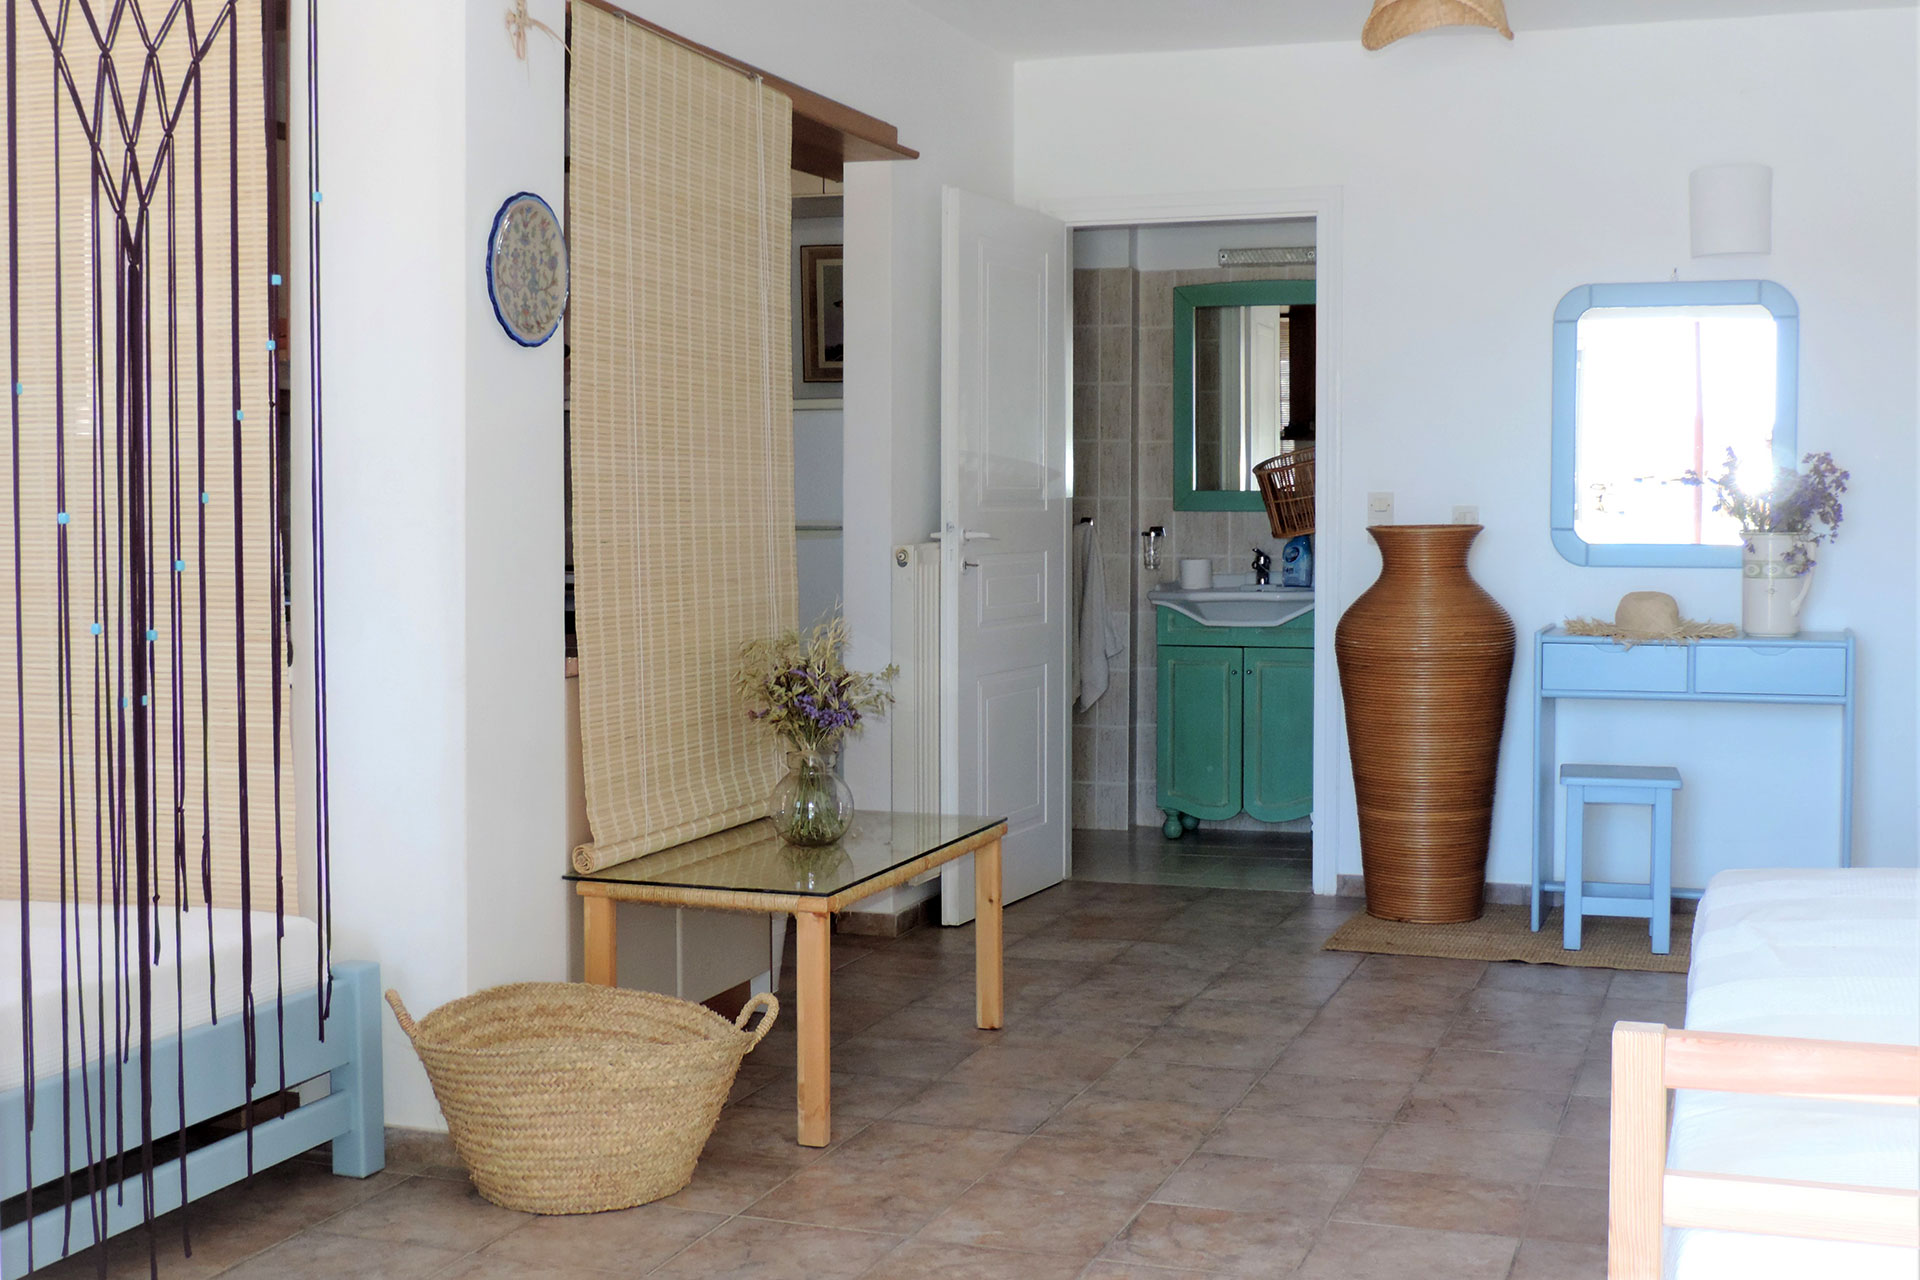 The interior of Ambeli family house at Kavos